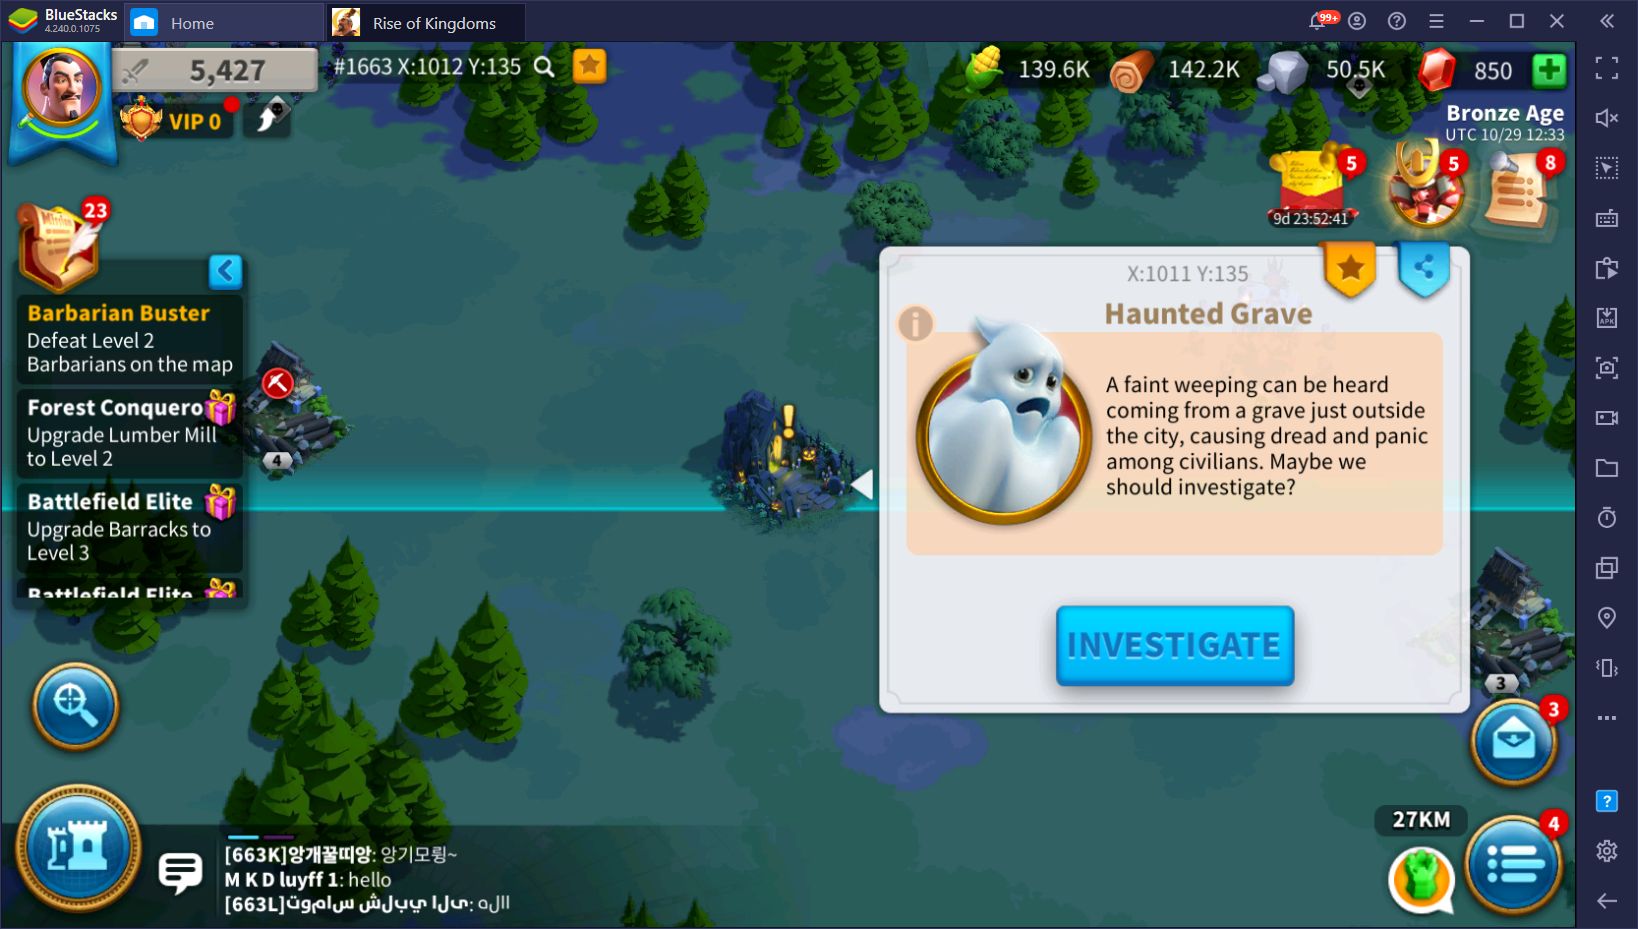 Rise of Kingdoms Halloween 2020 Event Guide - How to Participate and Obtain all the Loot